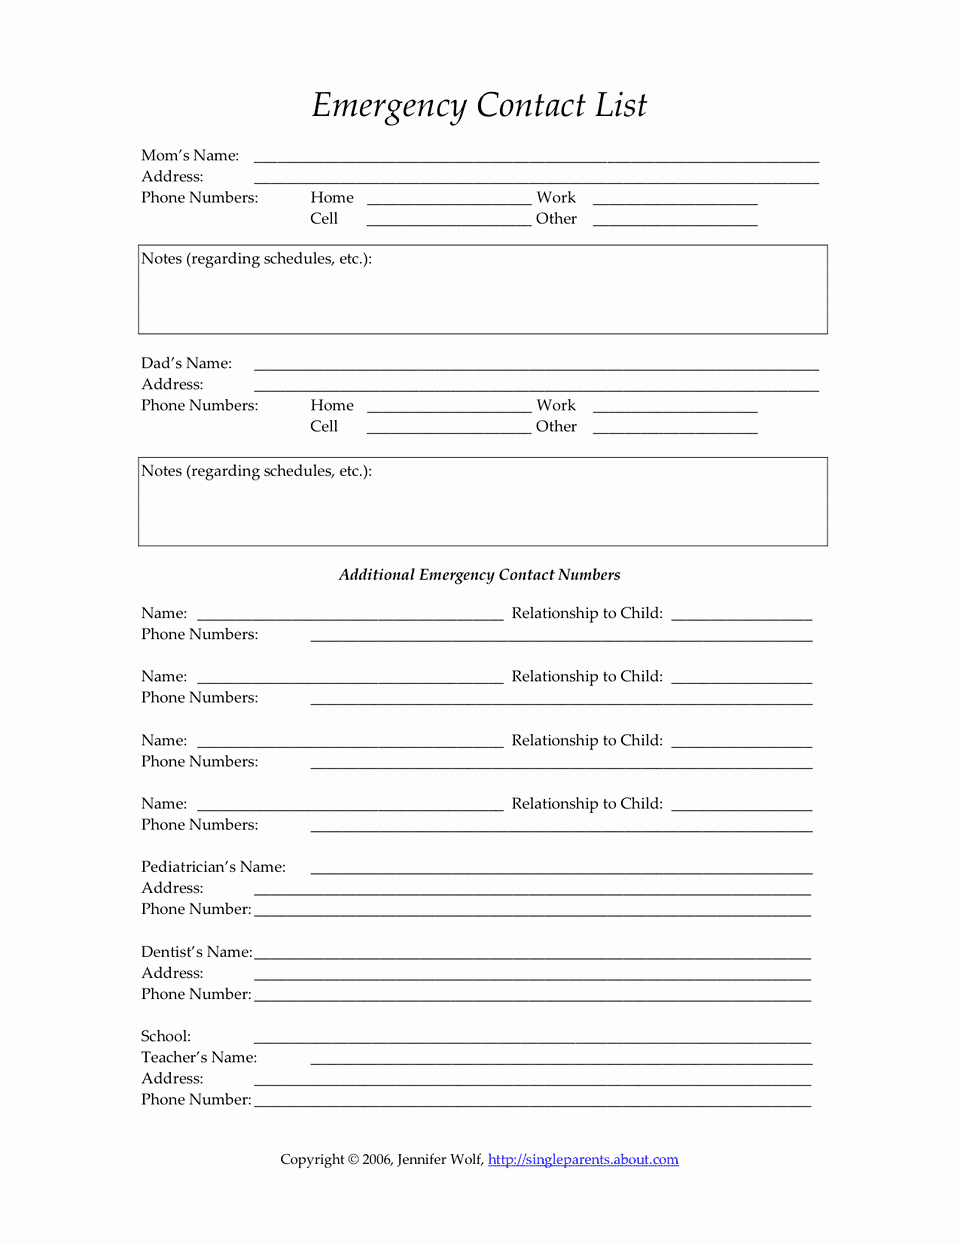 Emergency Contact List for Nanny New form Templates Child Care Emergency Contact form Child